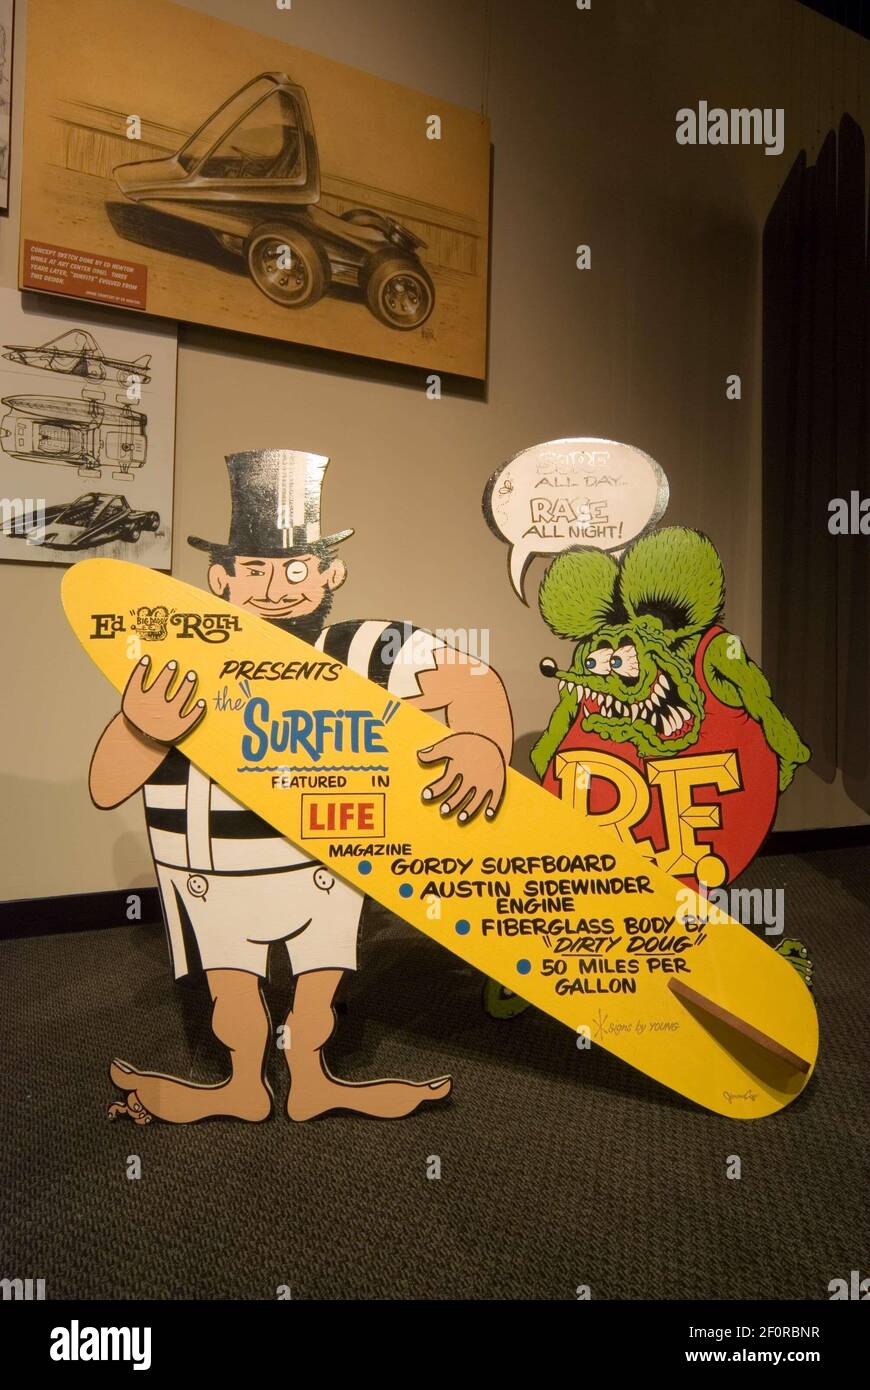 Surfite, 1964. 2 February 2007 - Los Angeles, California. Ed Ã’Big DaddyÃ“ Roth...The Original Rat Fink Exhibition at The Petersen Automotive Museum. The exhibition at the Petersen explores the life, times, and creations of designer, entrepreneur, and car fabricator Ed Ã’Big DaddyÃ“ Roth, Roth rose to celebrity status in the car-crazed youth culture of the 1960s, reinventing the custom car aesthetic with wild, fiberglass bodied fantasy hot rods. The archetypal Roth character, Rat Fink, was widely regarded as Mickey MouseÃ•s alter ego. Photo Credit: Giulio Marcocchi/Sipa Press (') Copyright 200 Stock Photo